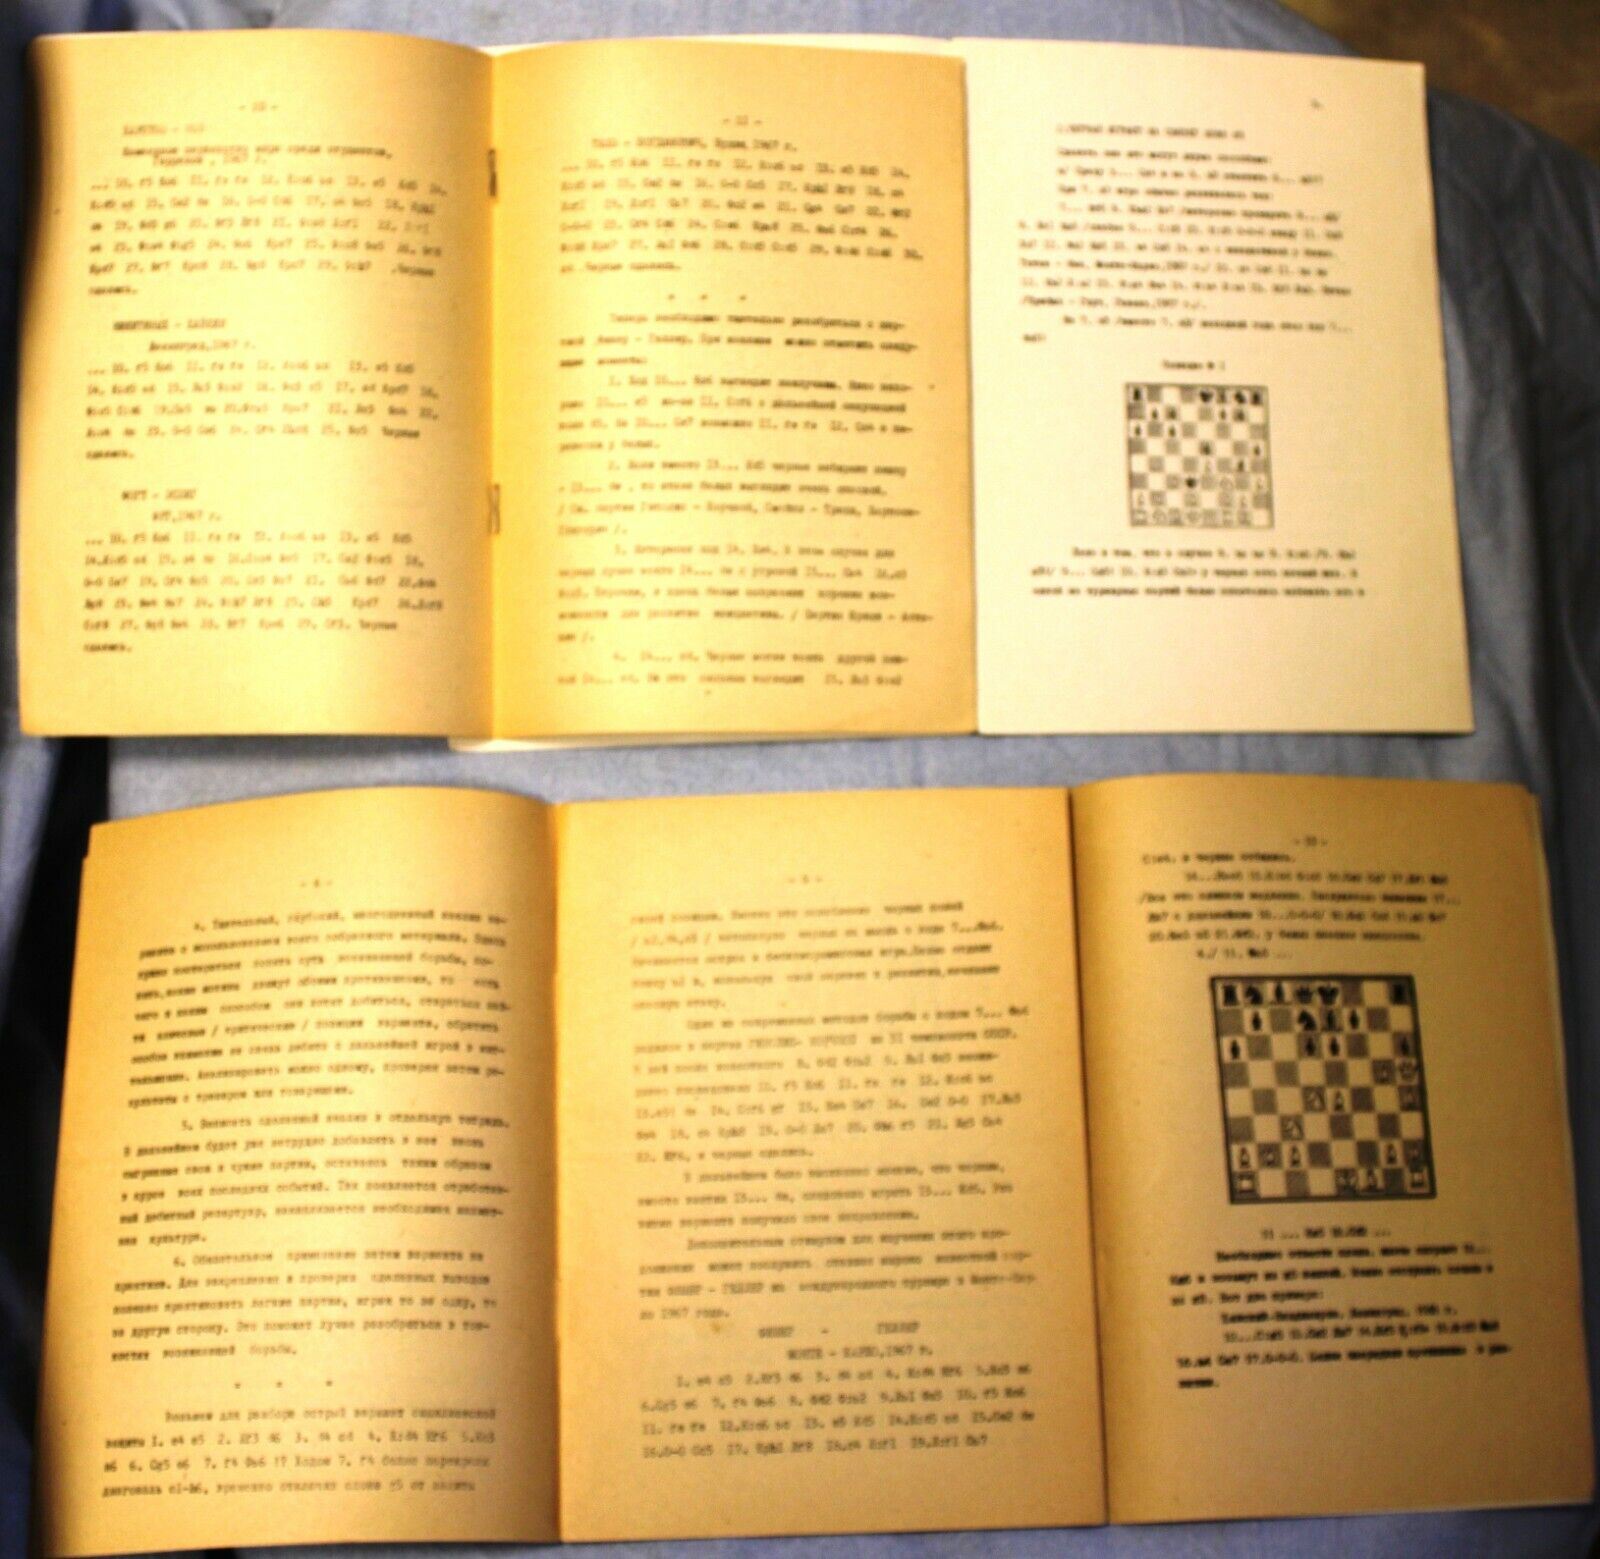 10736.4 Soviet Chess Books in Russian by Matsukevich Moscow, 1968